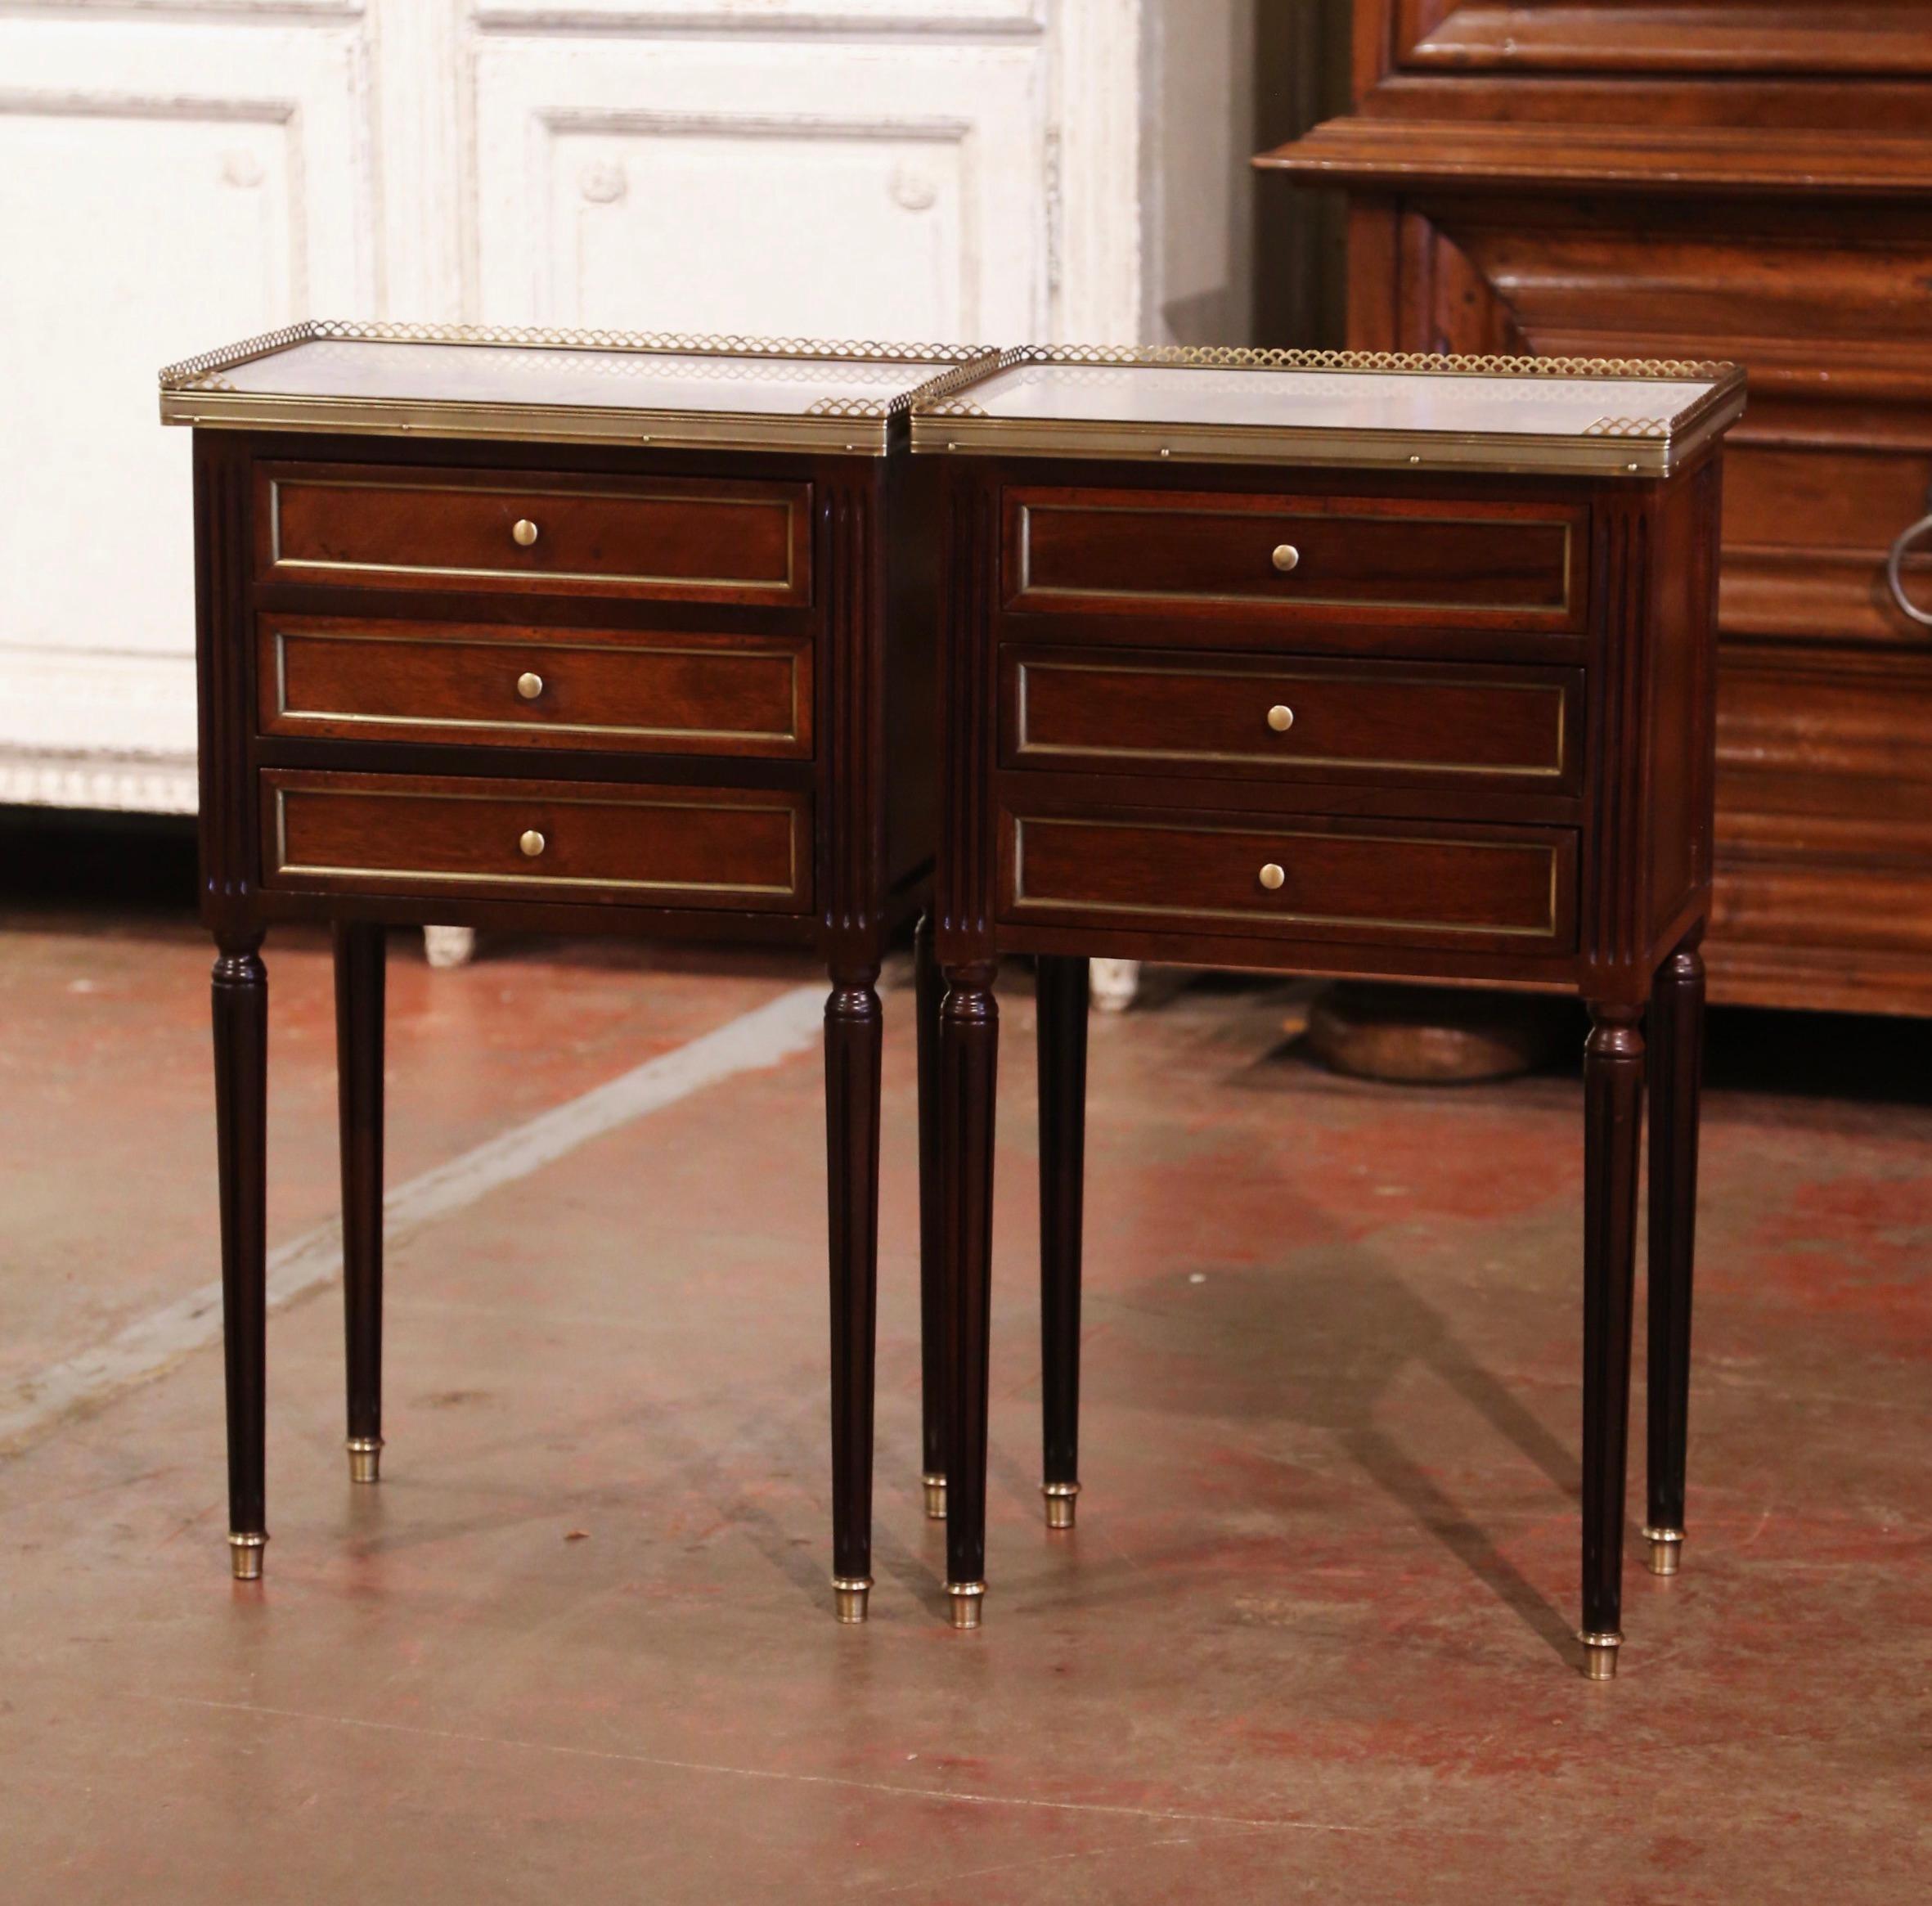 For sophisticated nightstands, look no further than these elegant antique bedside tables. Crafted in France circa 1940, the mahogany nightstands sit on four tapered legs ending with brass capped feet, and features three drawers decorated with brass